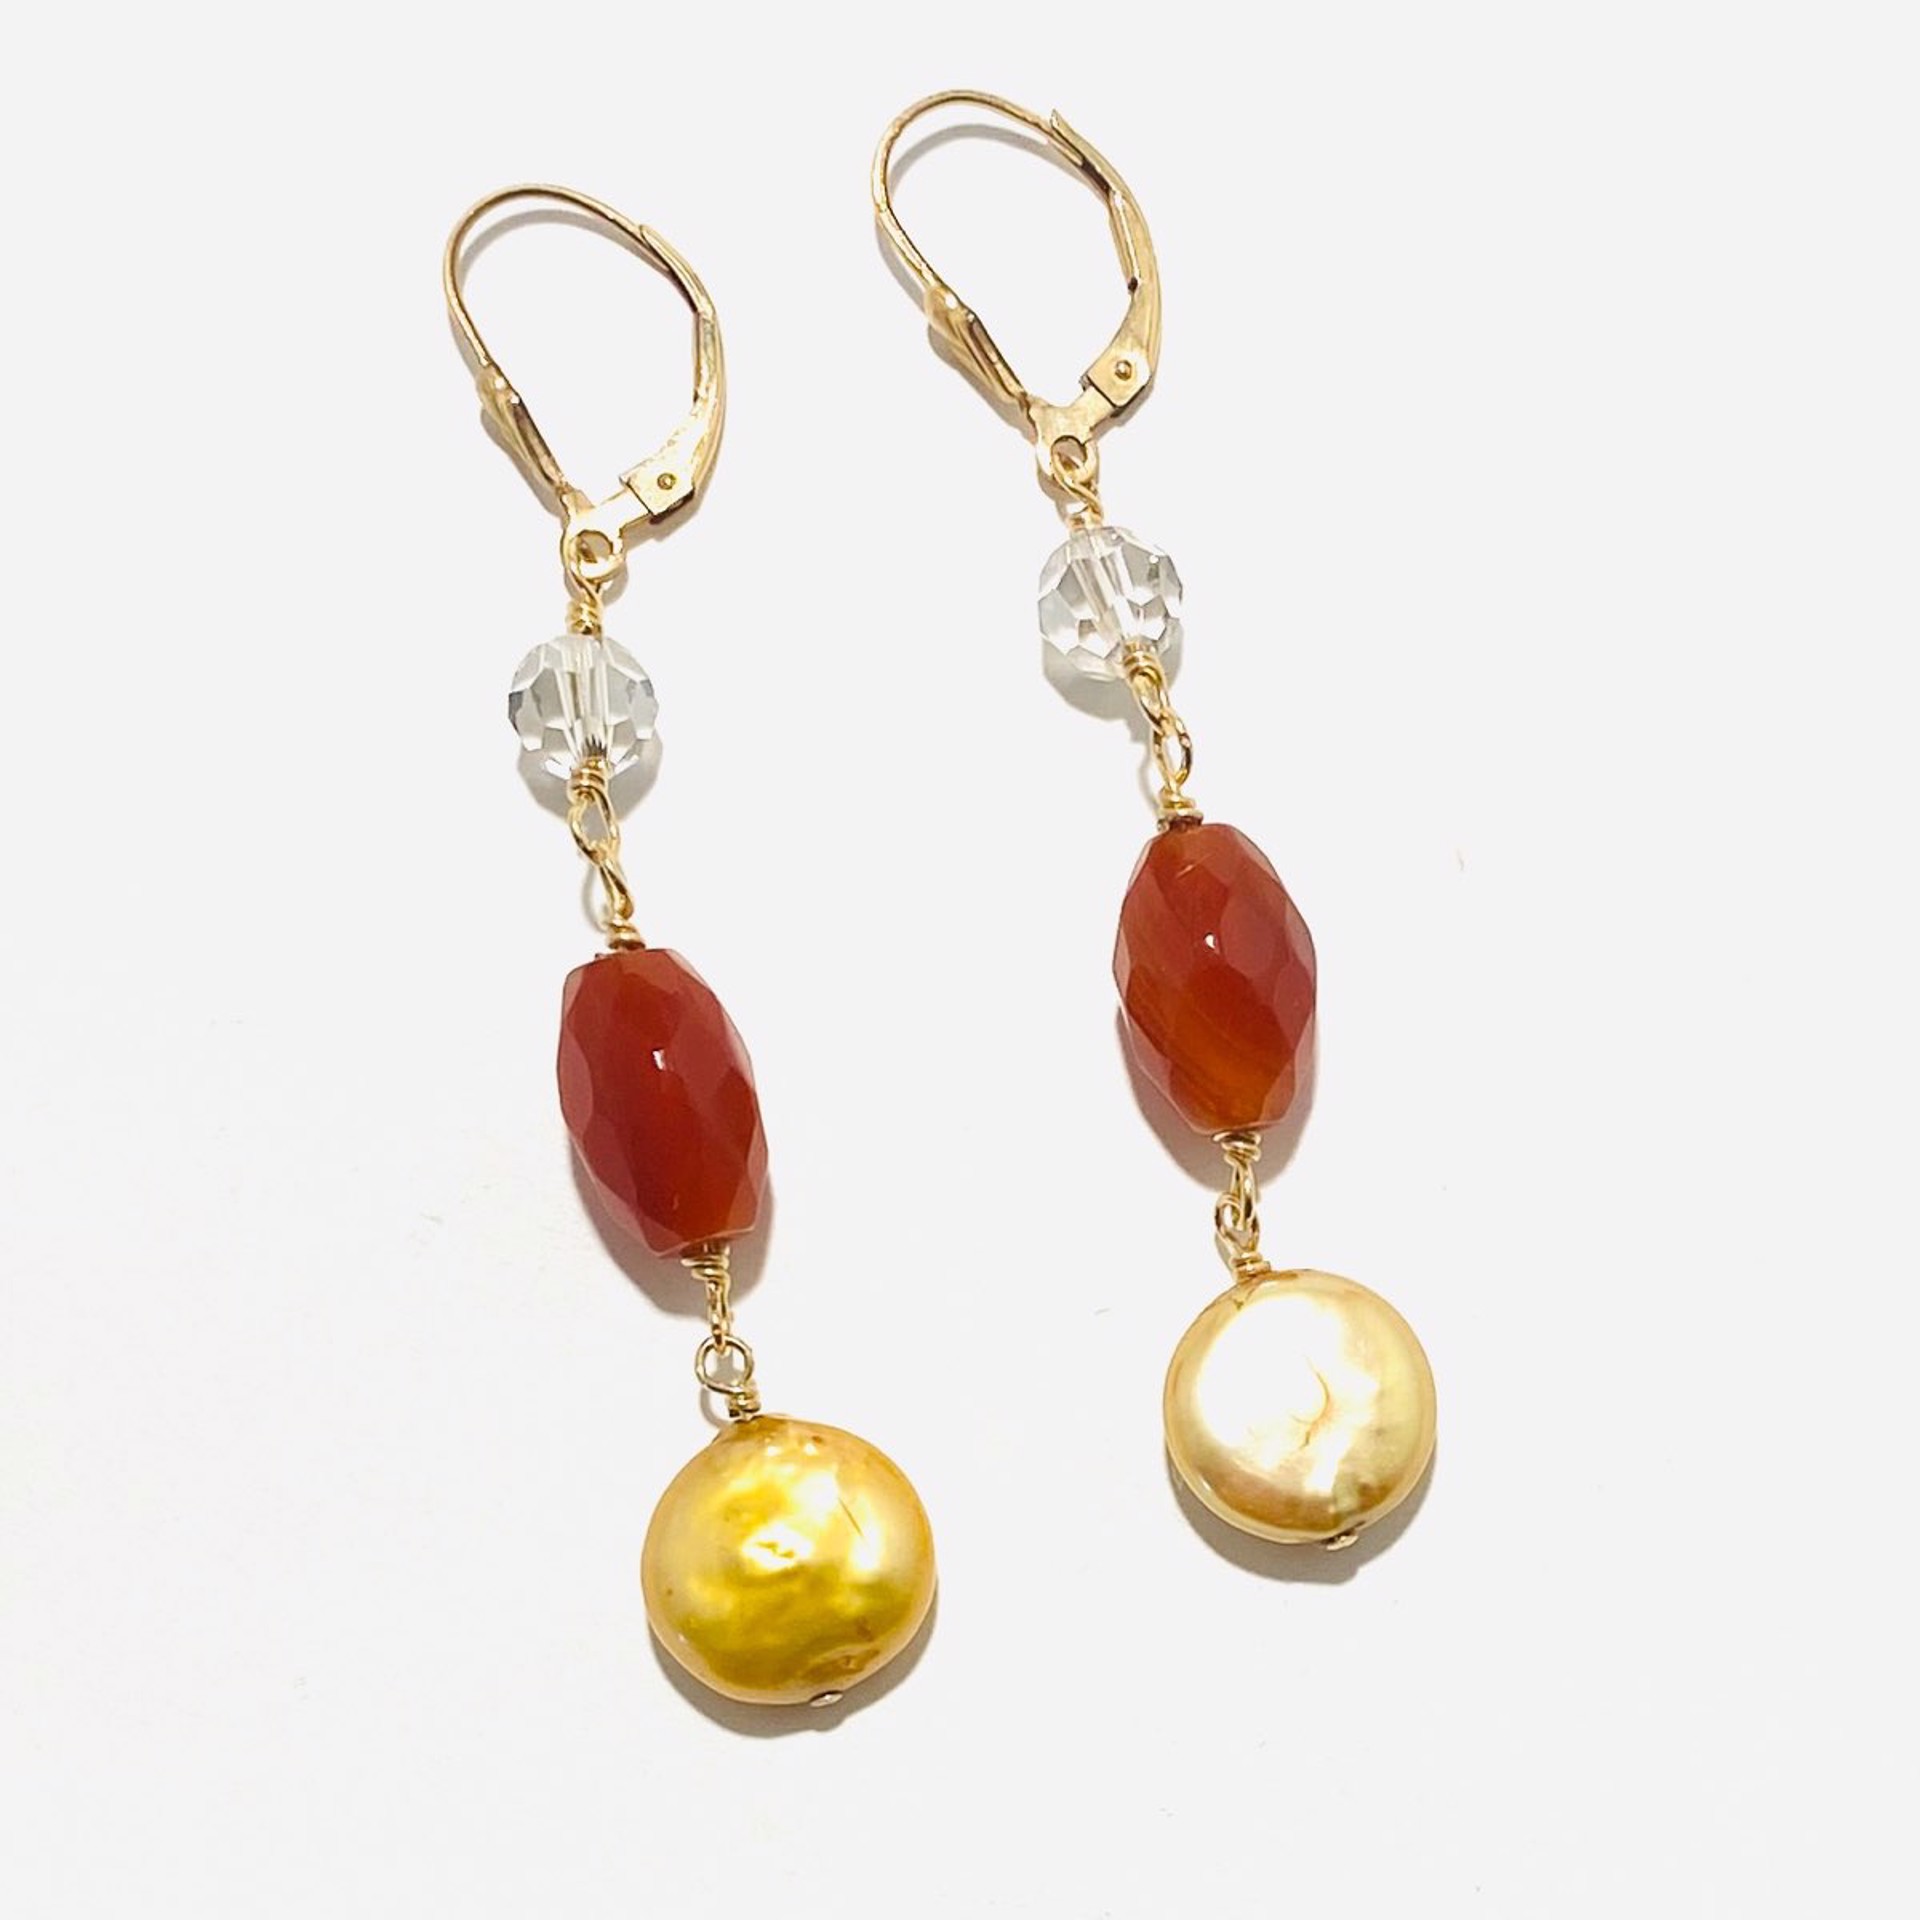 Gold Coin Pearl, Faceted Carnelian, Crystal GF Earrings LR23-37 by Legare Riano